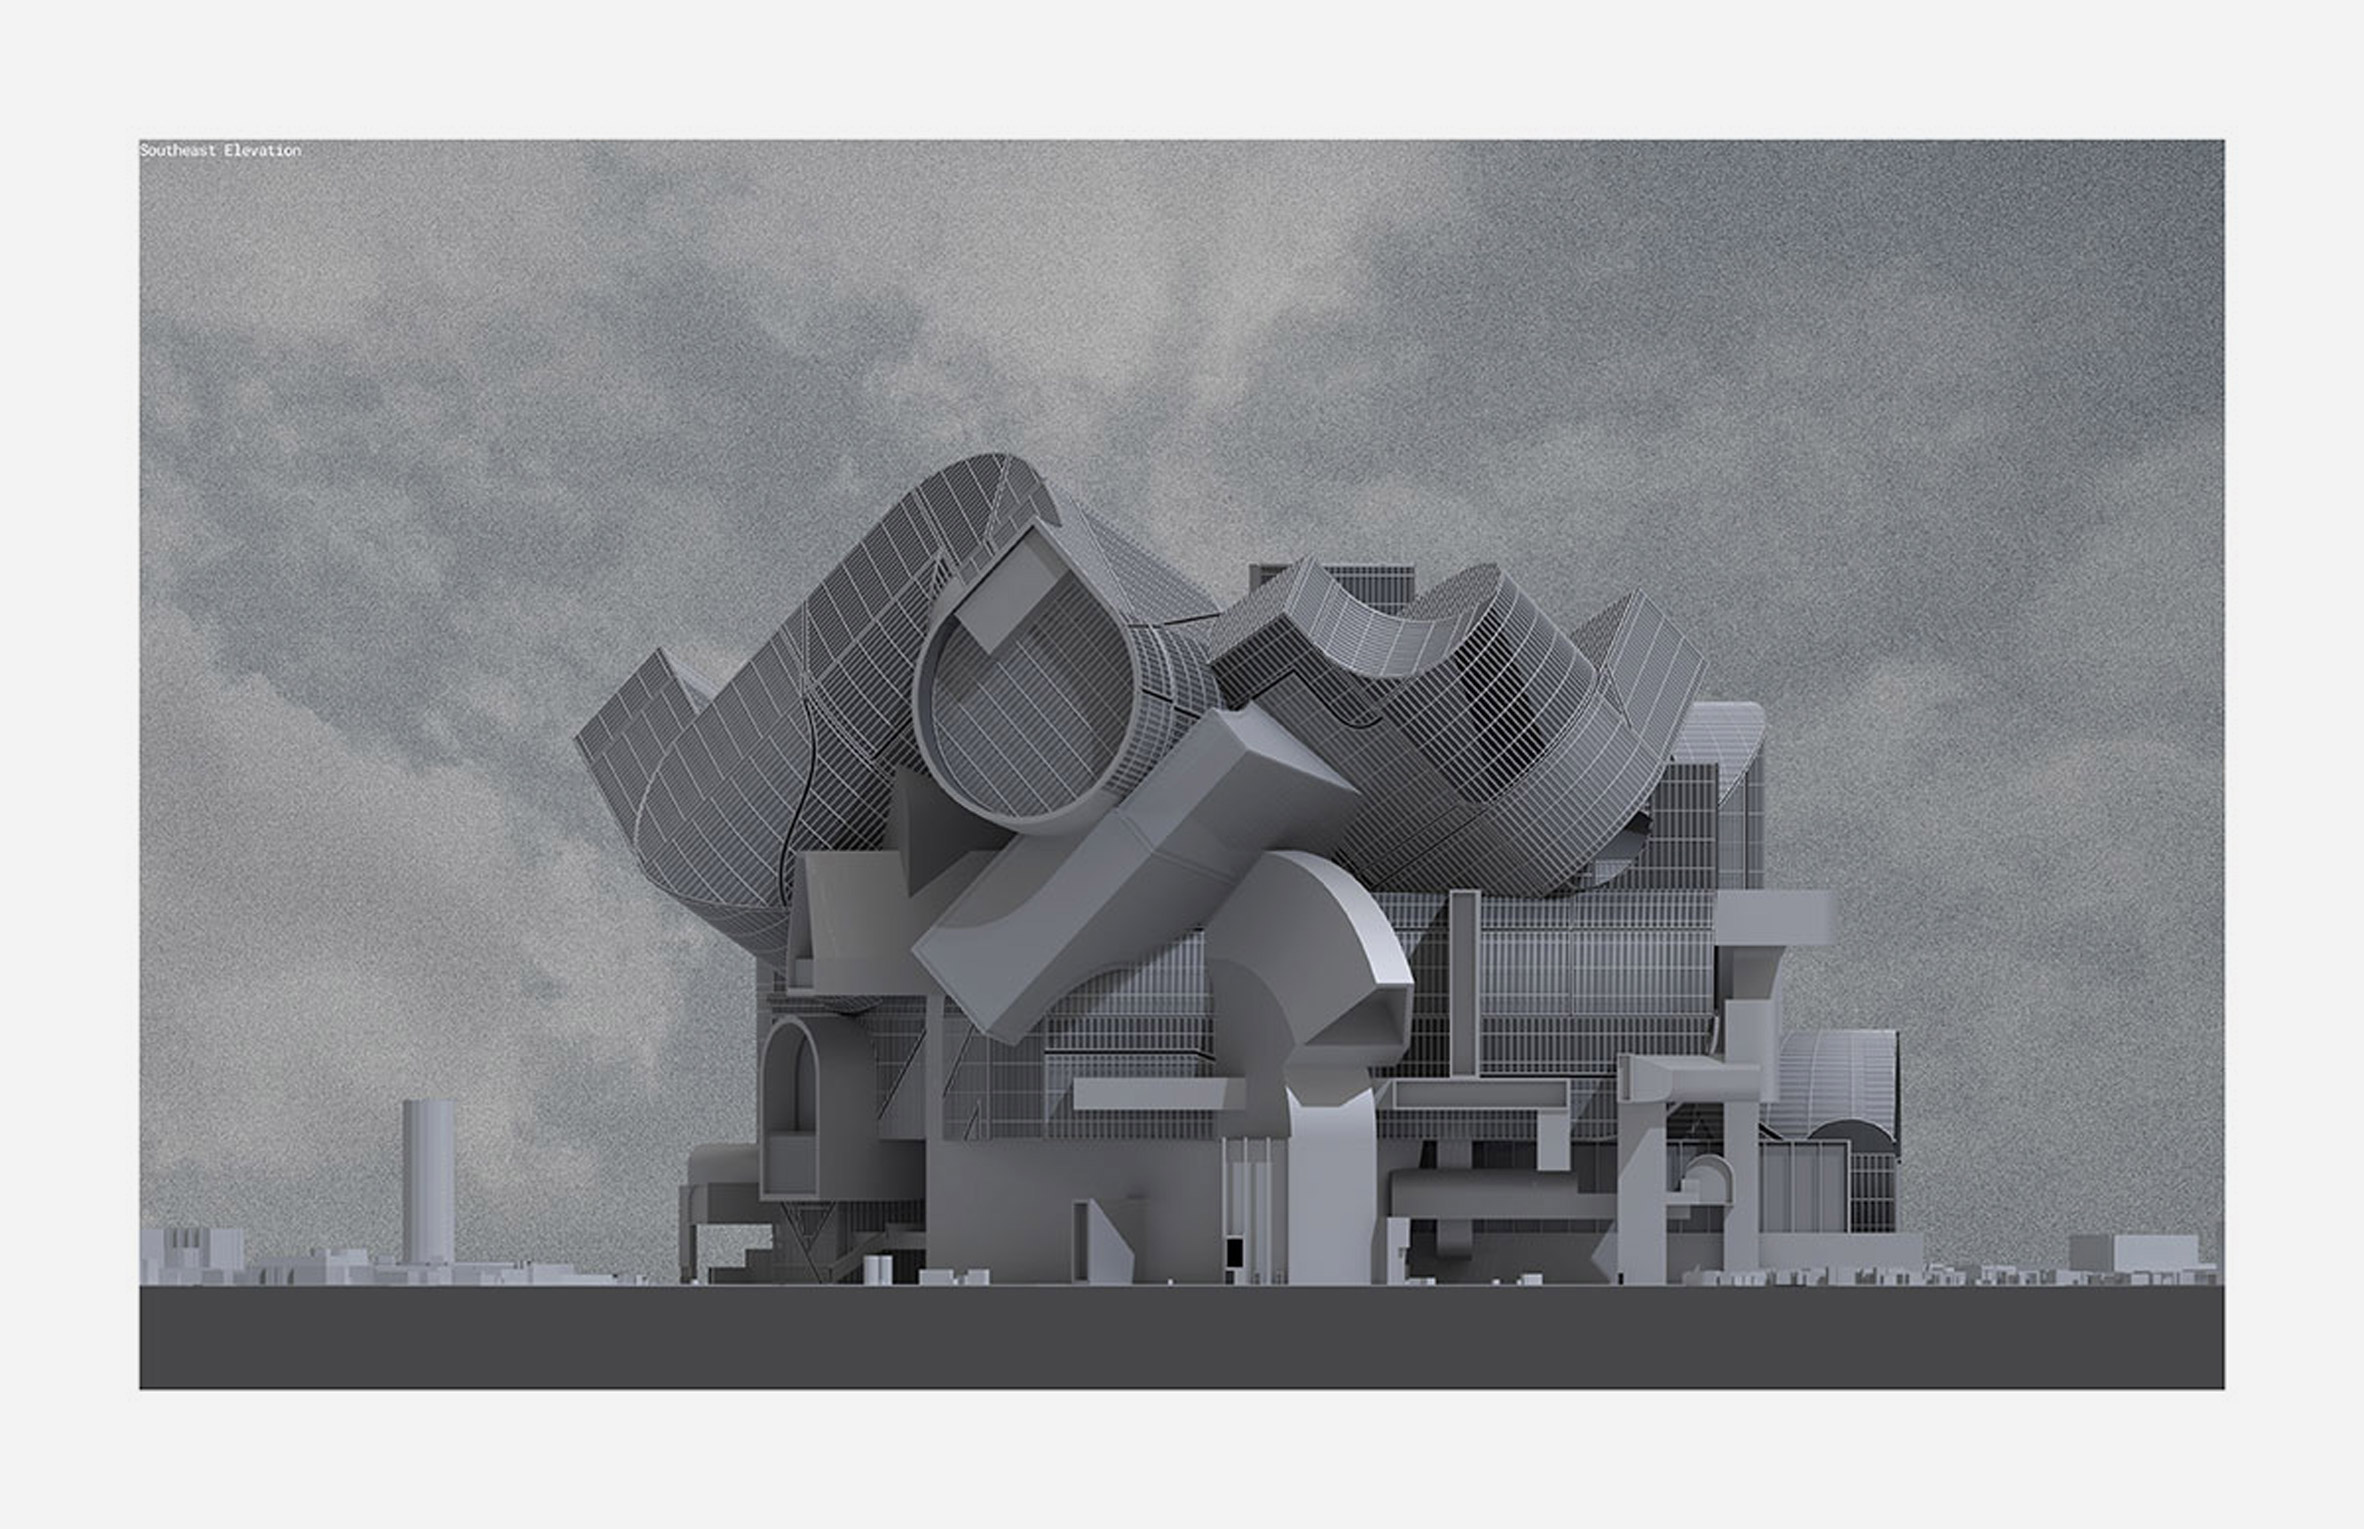 Visualisation of a building that takes inspiration from post-heroism 